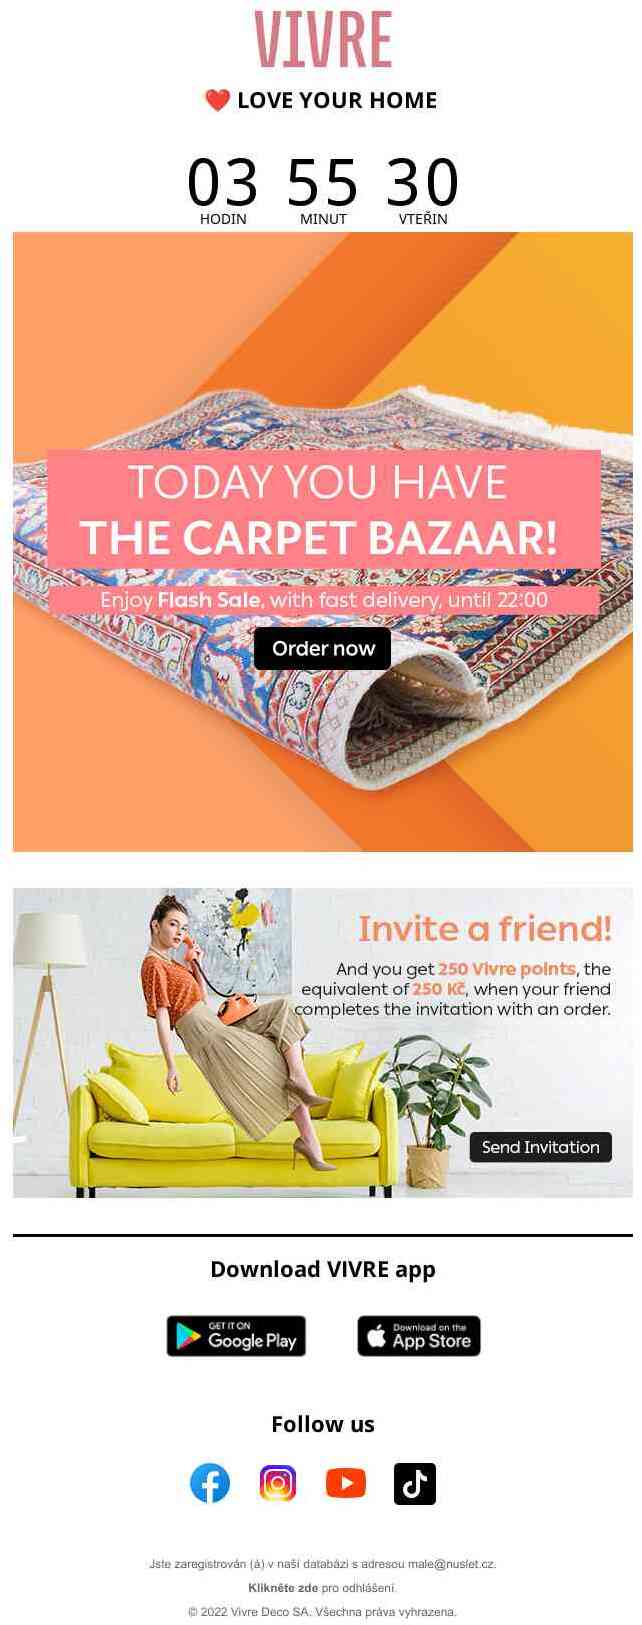 ⏰ You only have 5H to get the centerpiece of your home from the Carpet Bazaar collection.